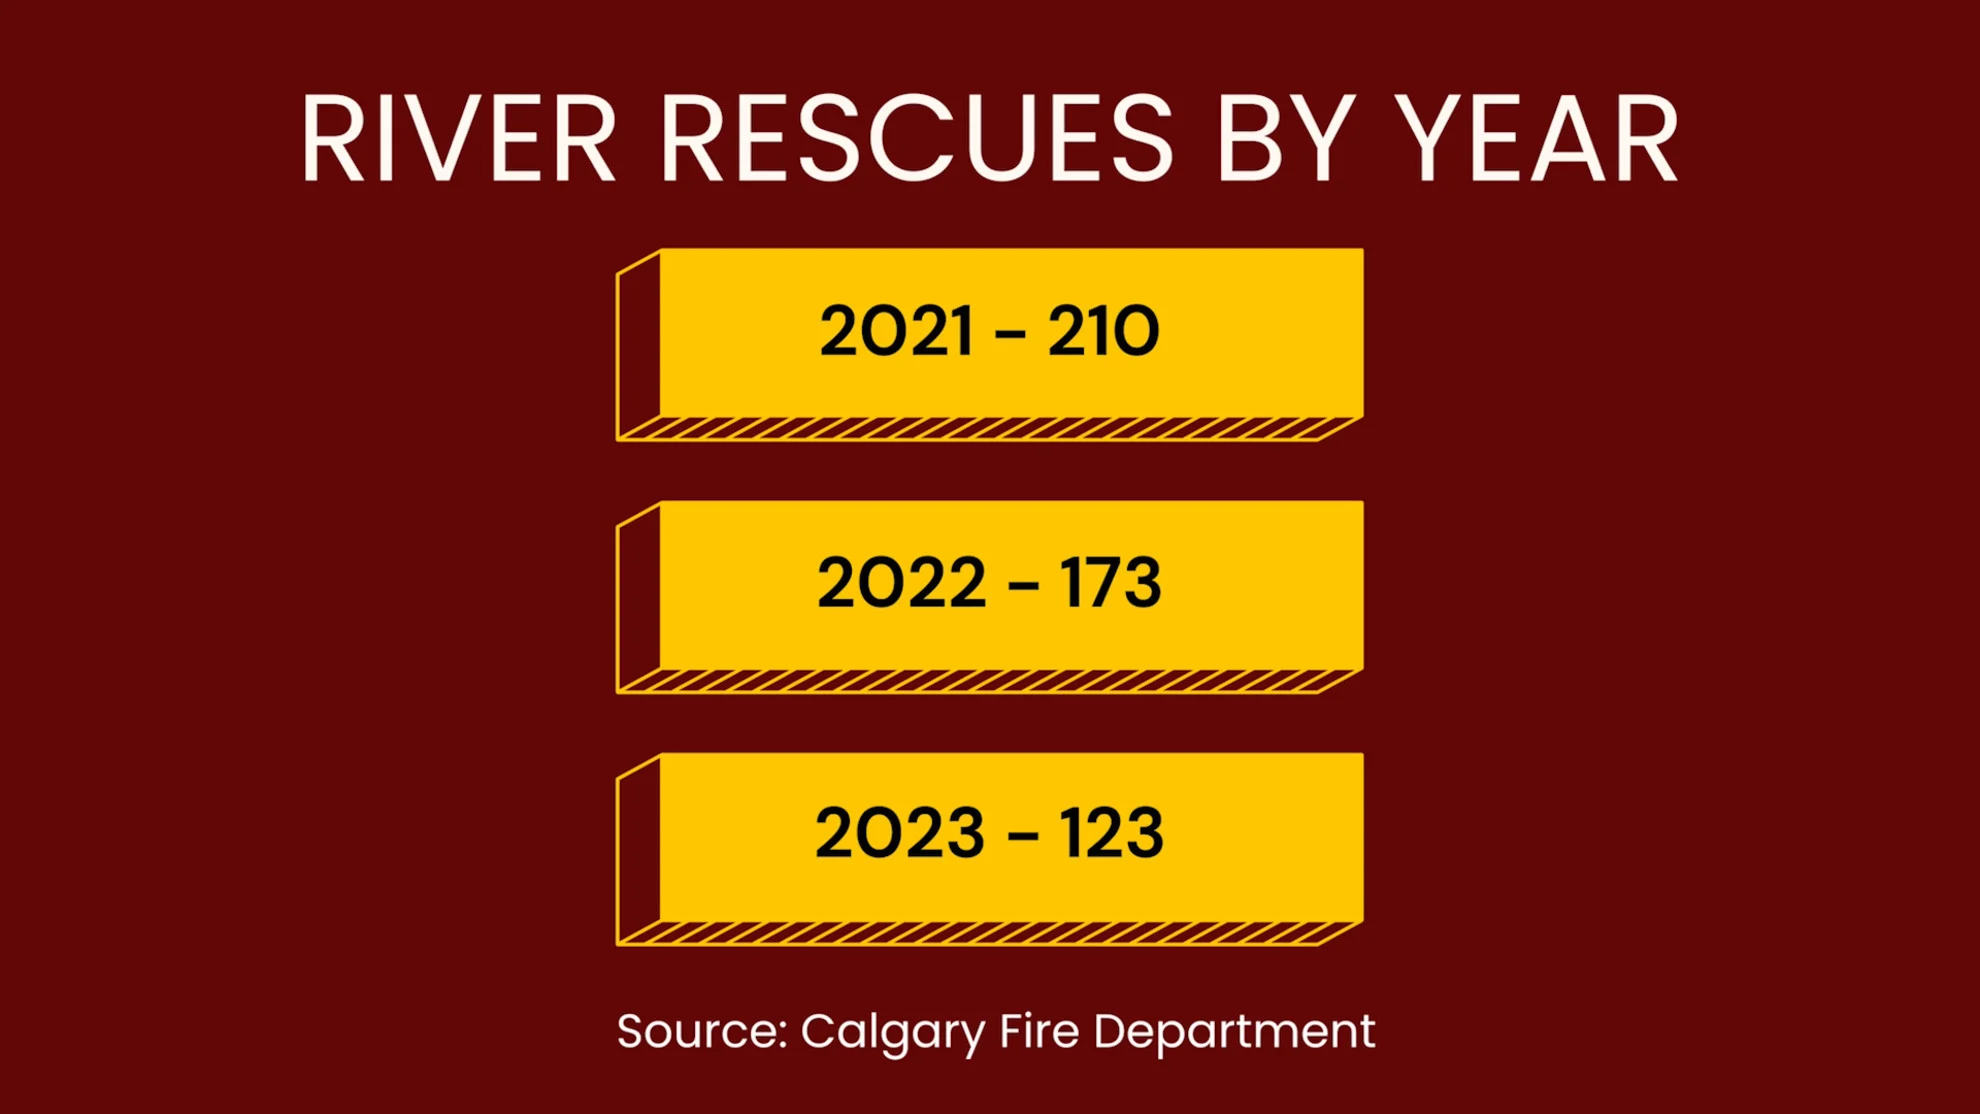 River rescues by year - Calgary fire department